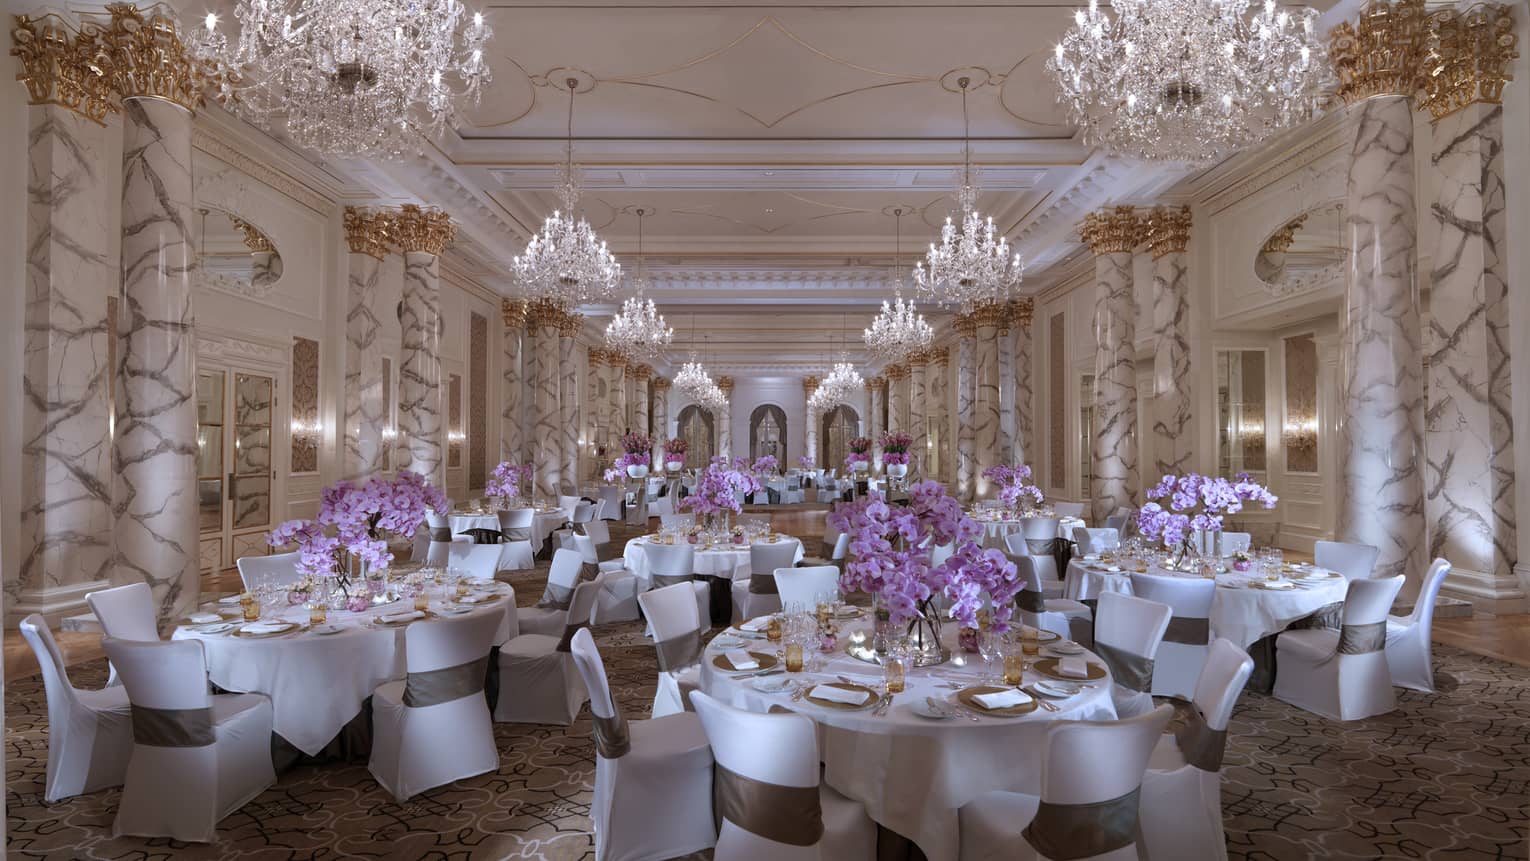 Elegant ballroom with banquet tables under tall marble pillars, crystal chandeliers 